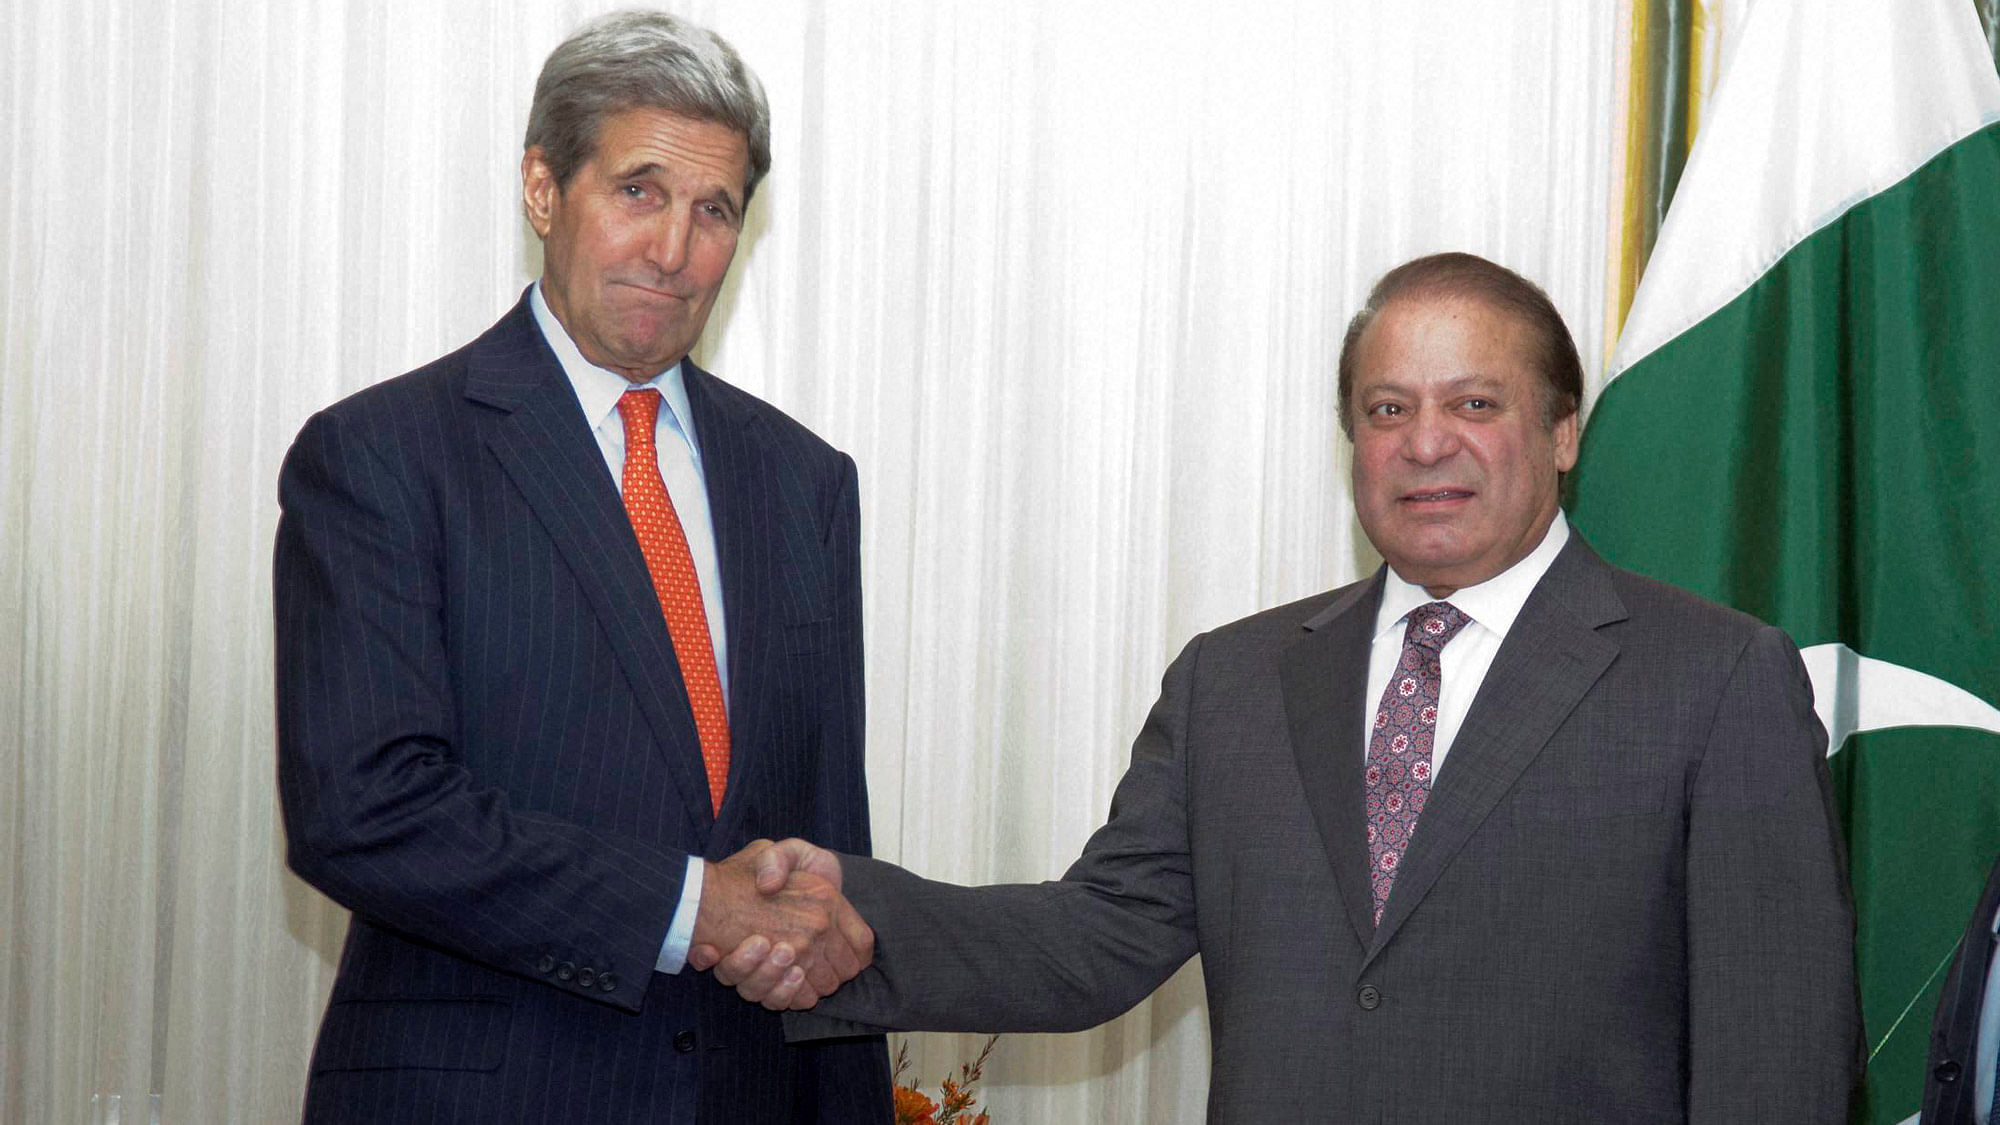 US Secretary of State John Kerry shakes hands with Pakistani Prime Minister Nawaz Sharif during their meeting at  Blair House in Washington, Wednesday, October 21, 2015.(Photo: PTI)